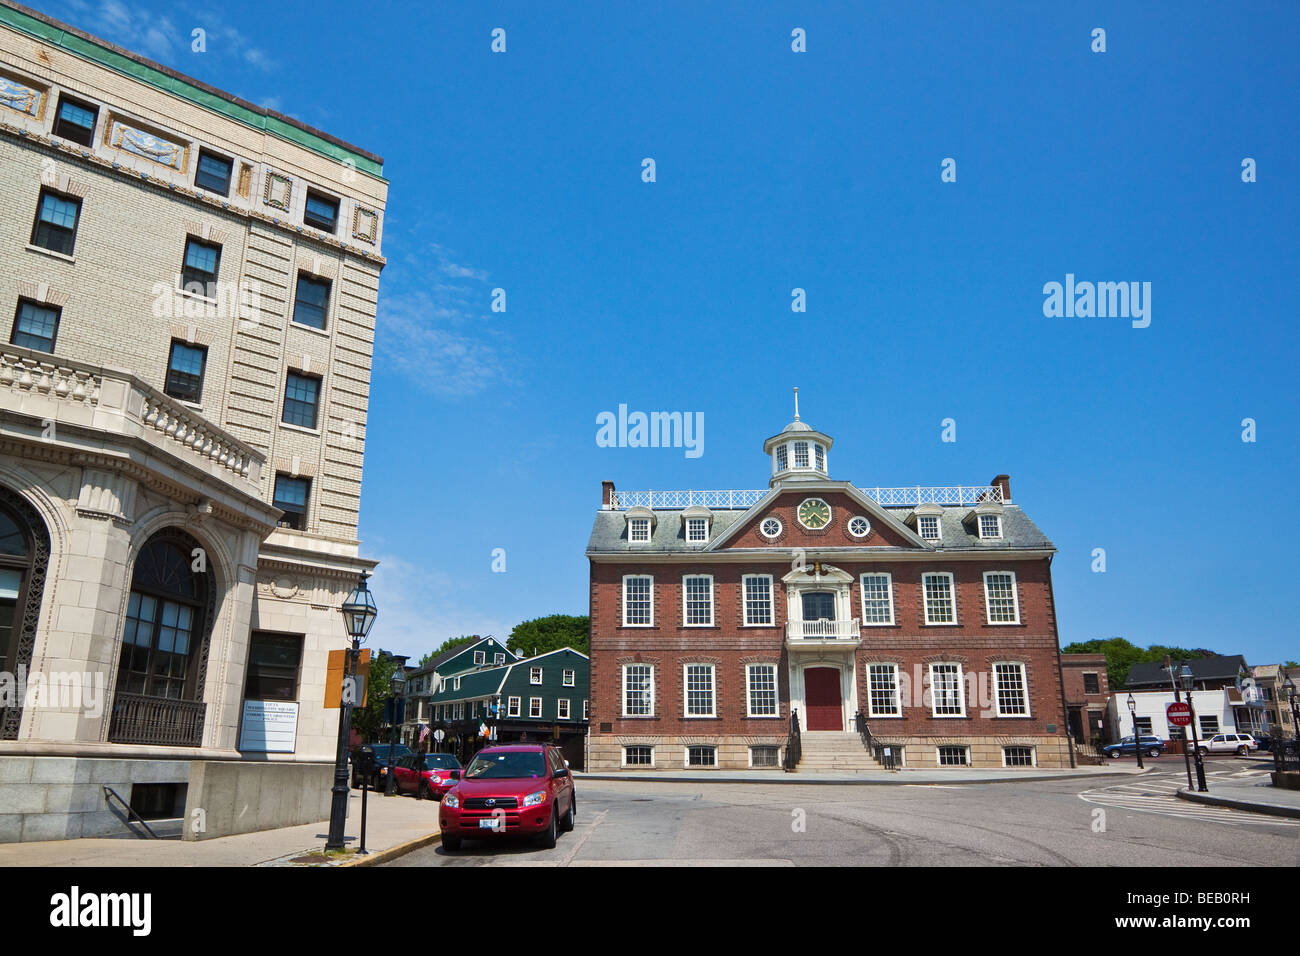 Washington Square and the brick Georgian-style Old Colony House (1741) in Newport, Rhode Island, New England, U.S.A. Stock Photo